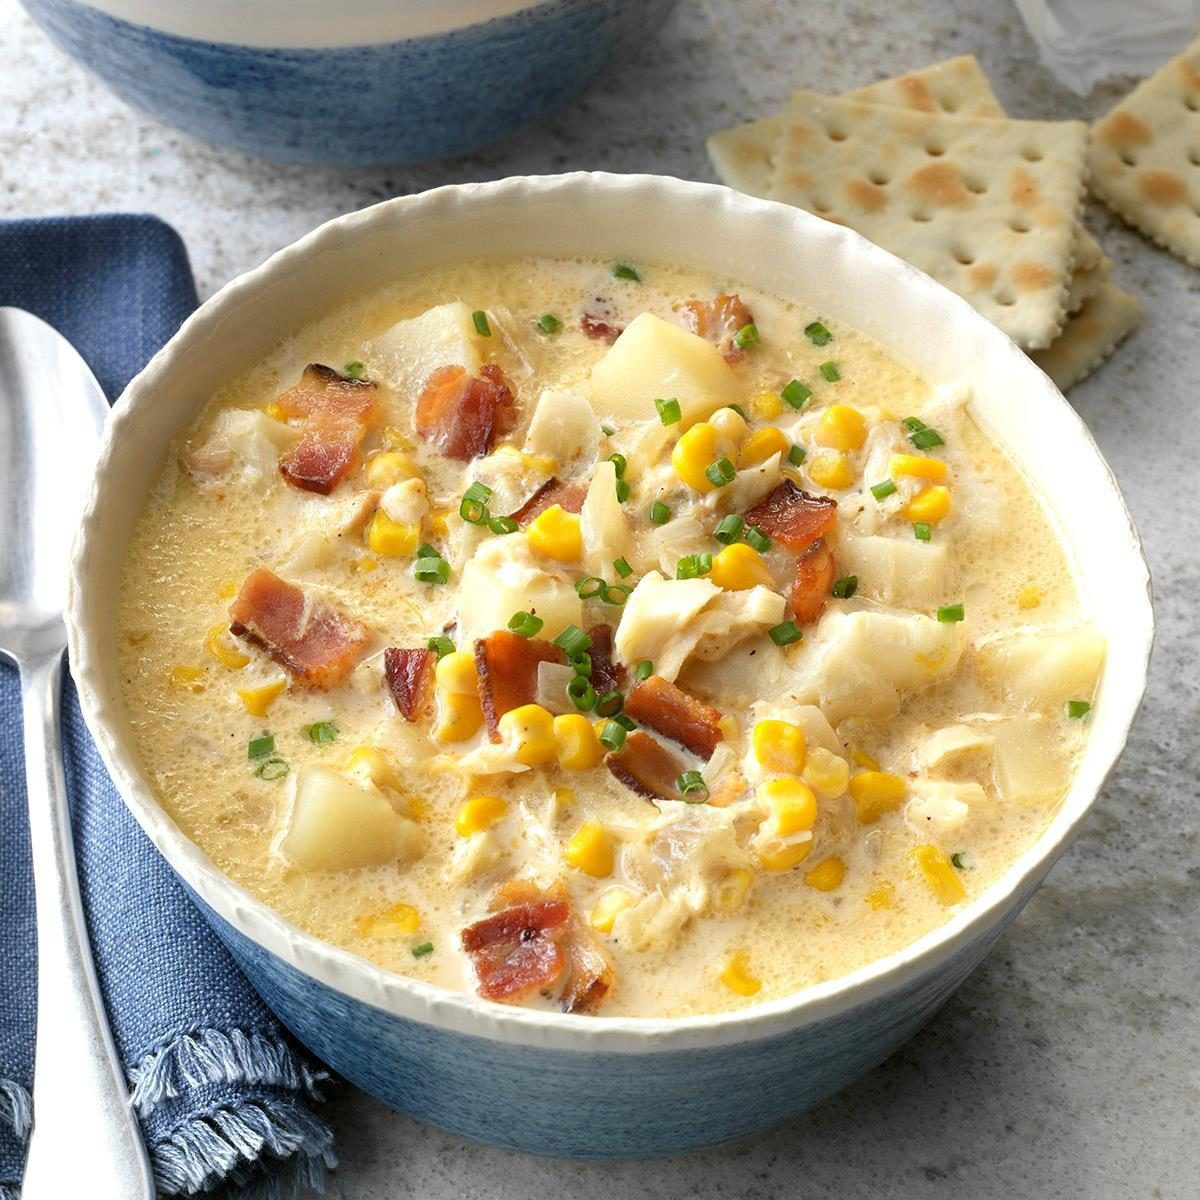 Recipes For Fish Chowder
 Country Fish Chowder Recipe